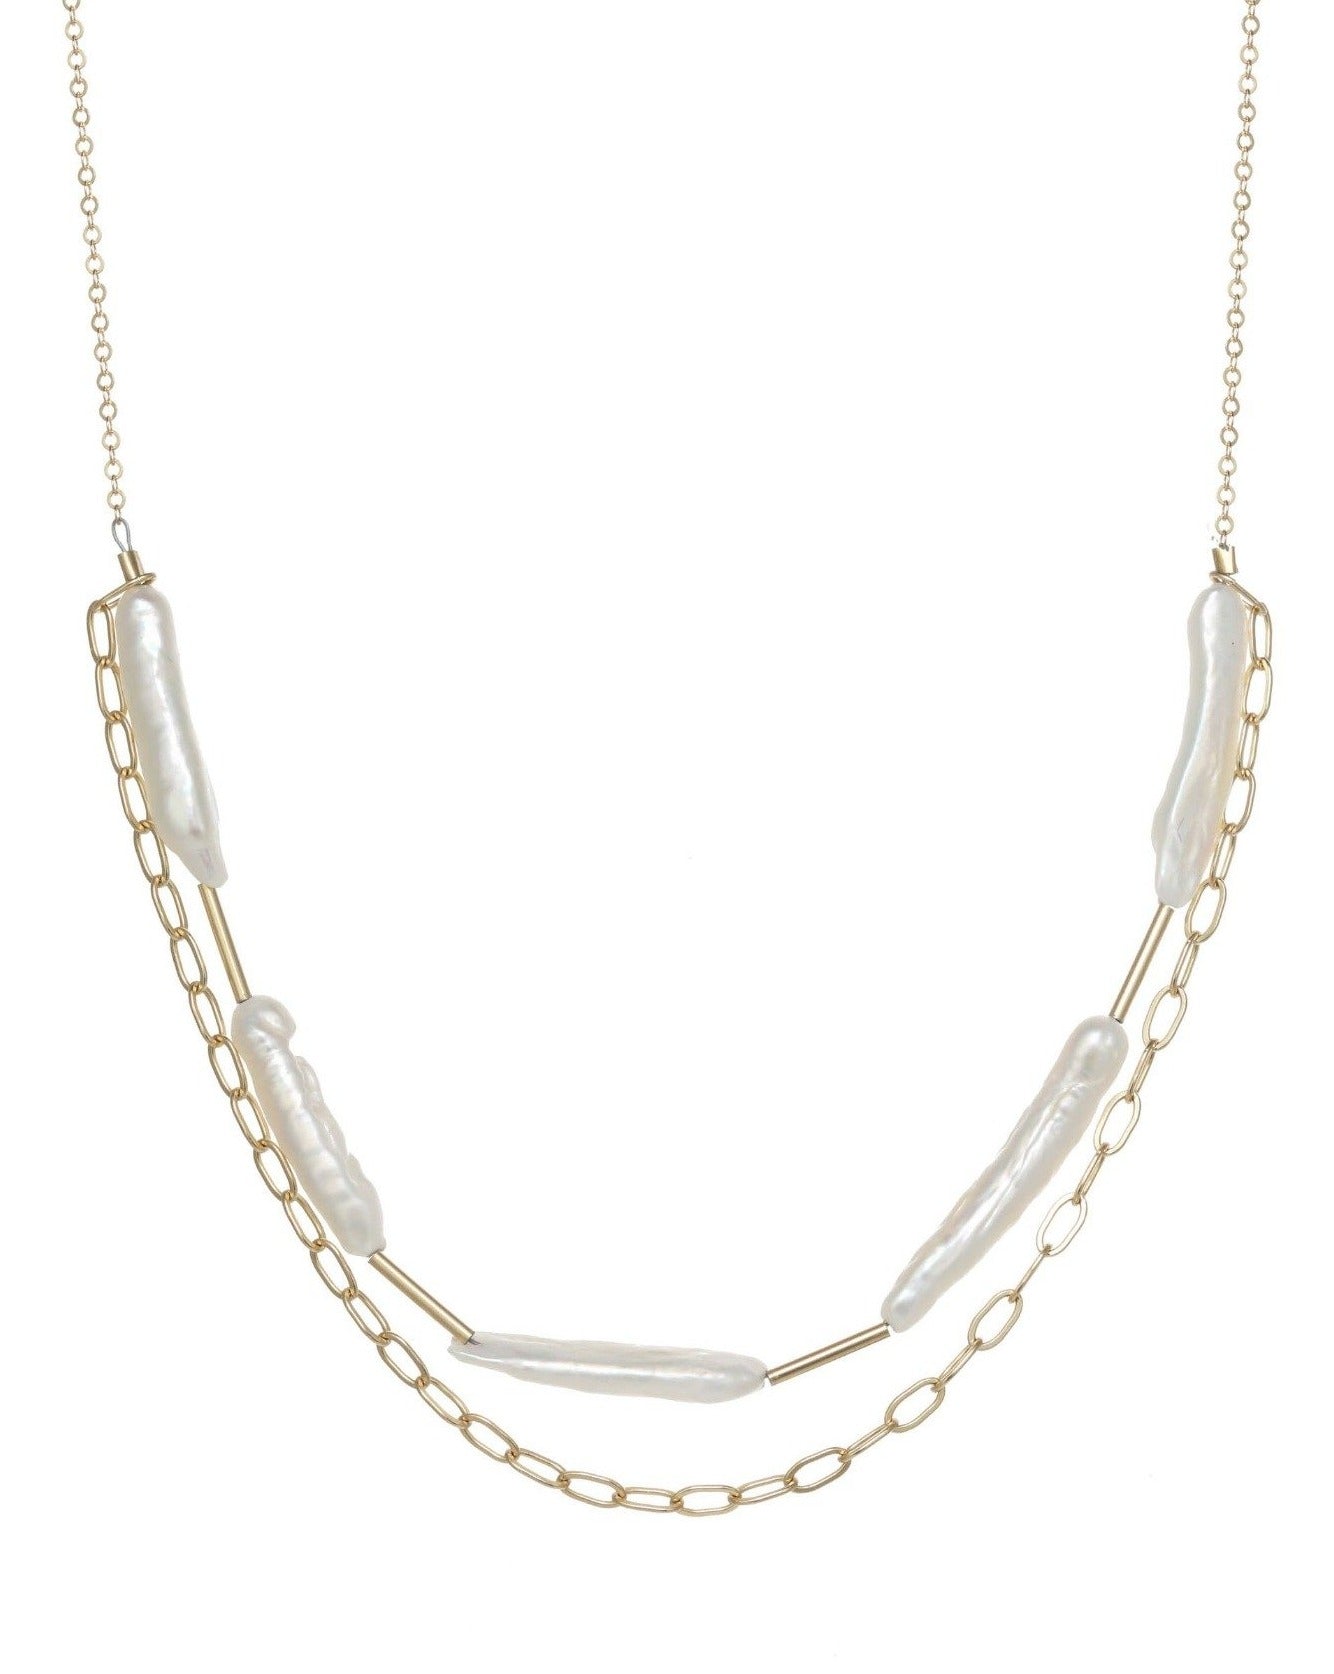 Sarah Necklace by KOZAKH. A 14 to 16 inch adjustable length necklace, crafted in 14K Gold Filled, with a lower half consists of 30mm to 40mm White Biwa Pearl strand.